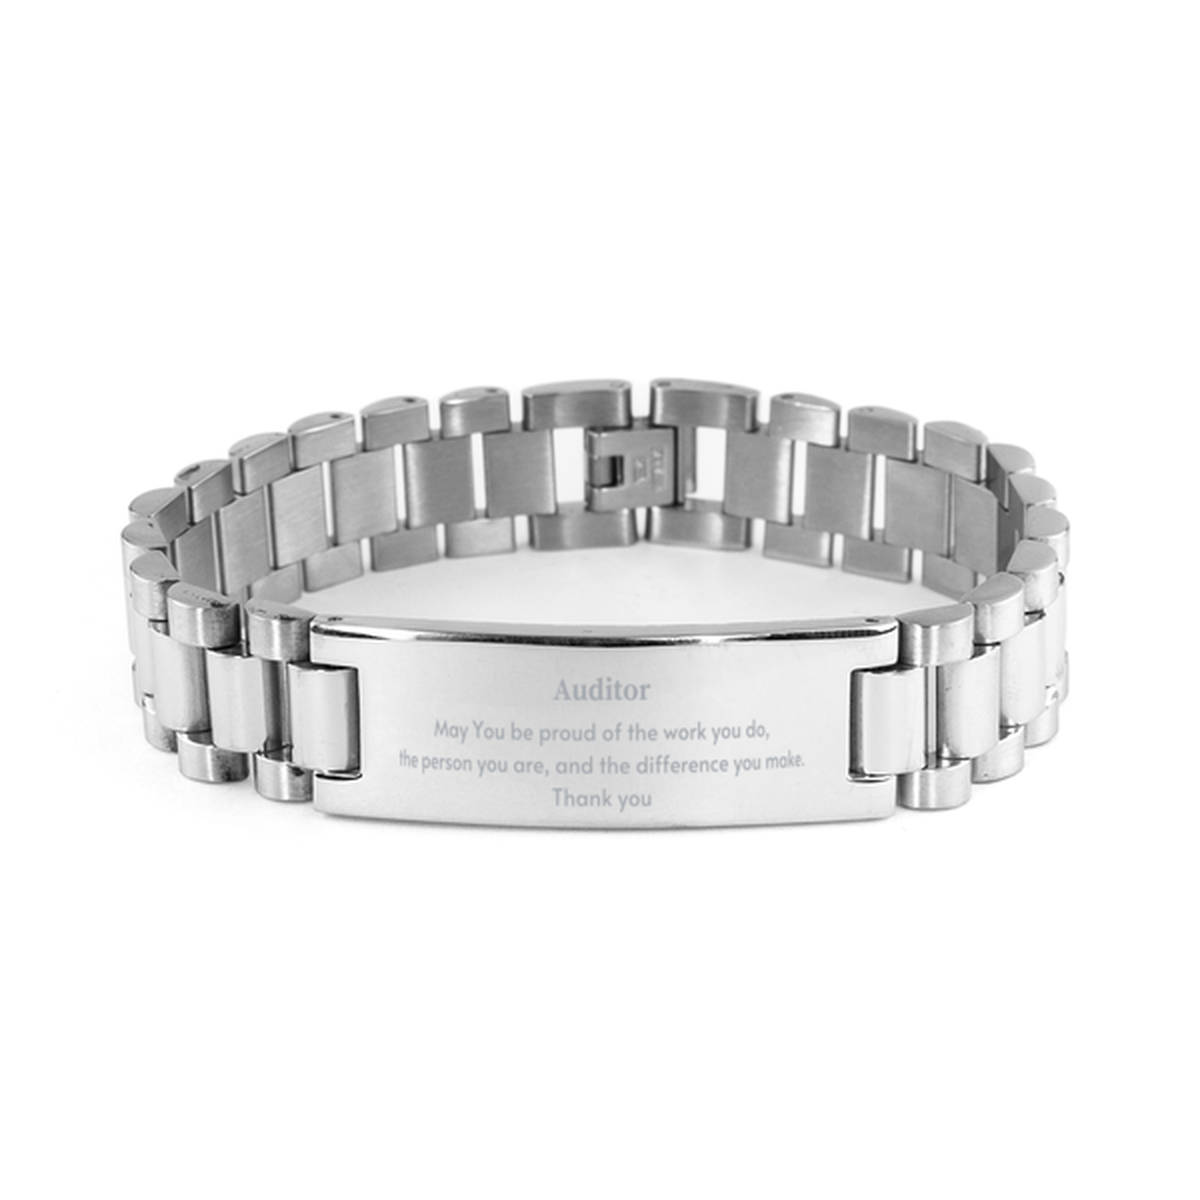 Heartwarming Ladder Stainless Steel Bracelet Retirement Coworkers Gifts for Auditor, Auditor May You be proud of the work you do, the person you are Gifts for Boss Men Women Friends